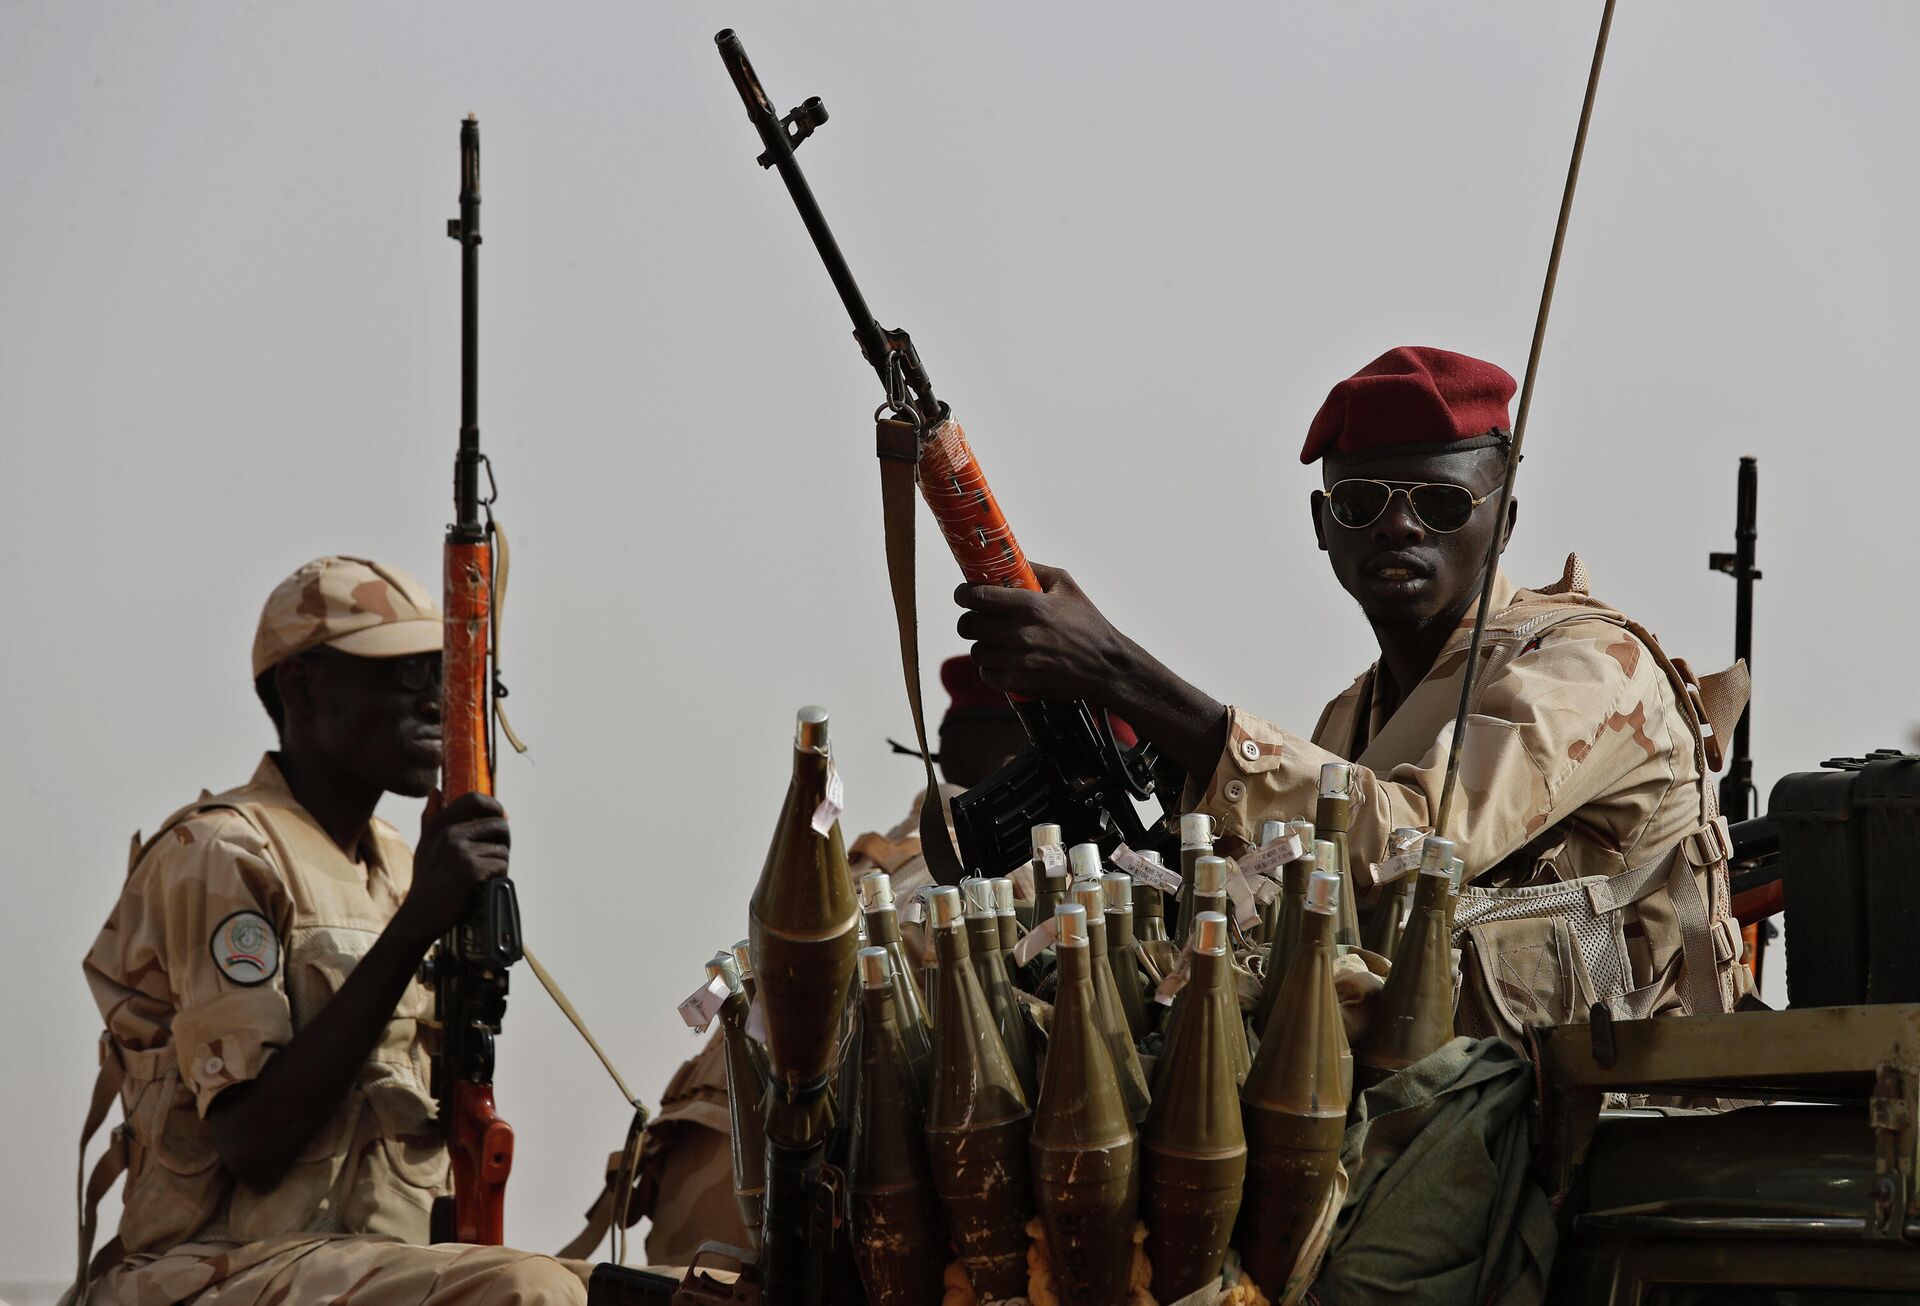 Sudanese soldiers from the Rapid Support Forces unit which led by Gen. Mohammed Hamdan Dagalo, the deputy head of the military council, secure the area where Dagalo attends a military-backed tribe's rally, in the East Nile province, Sudan, Saturday, June 22, 2019. - Sputnik International, 1920, 15.10.2022